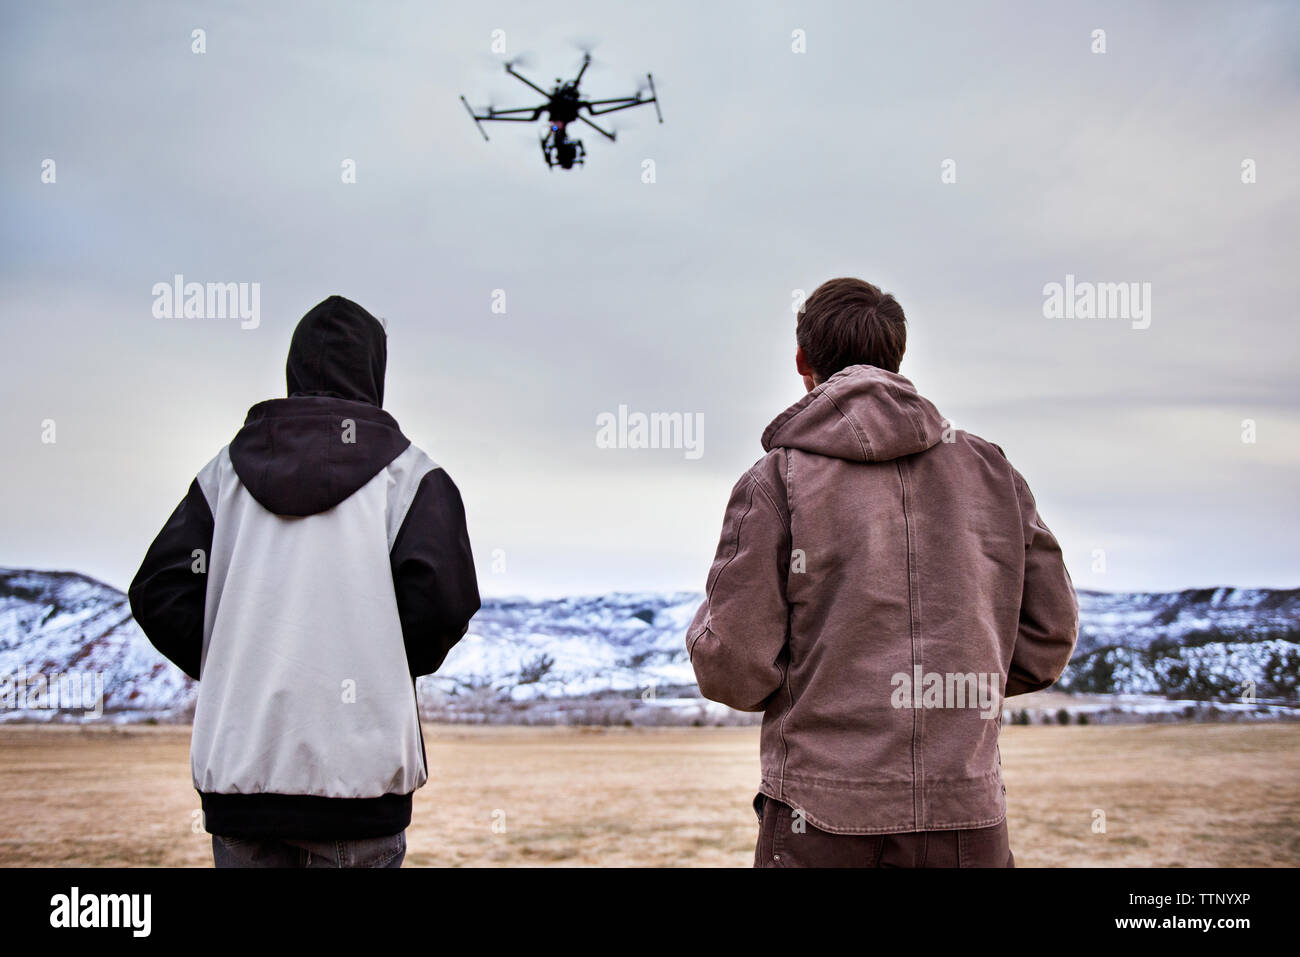 Rear view of father and son flying Drone over field during winter Stock Photo